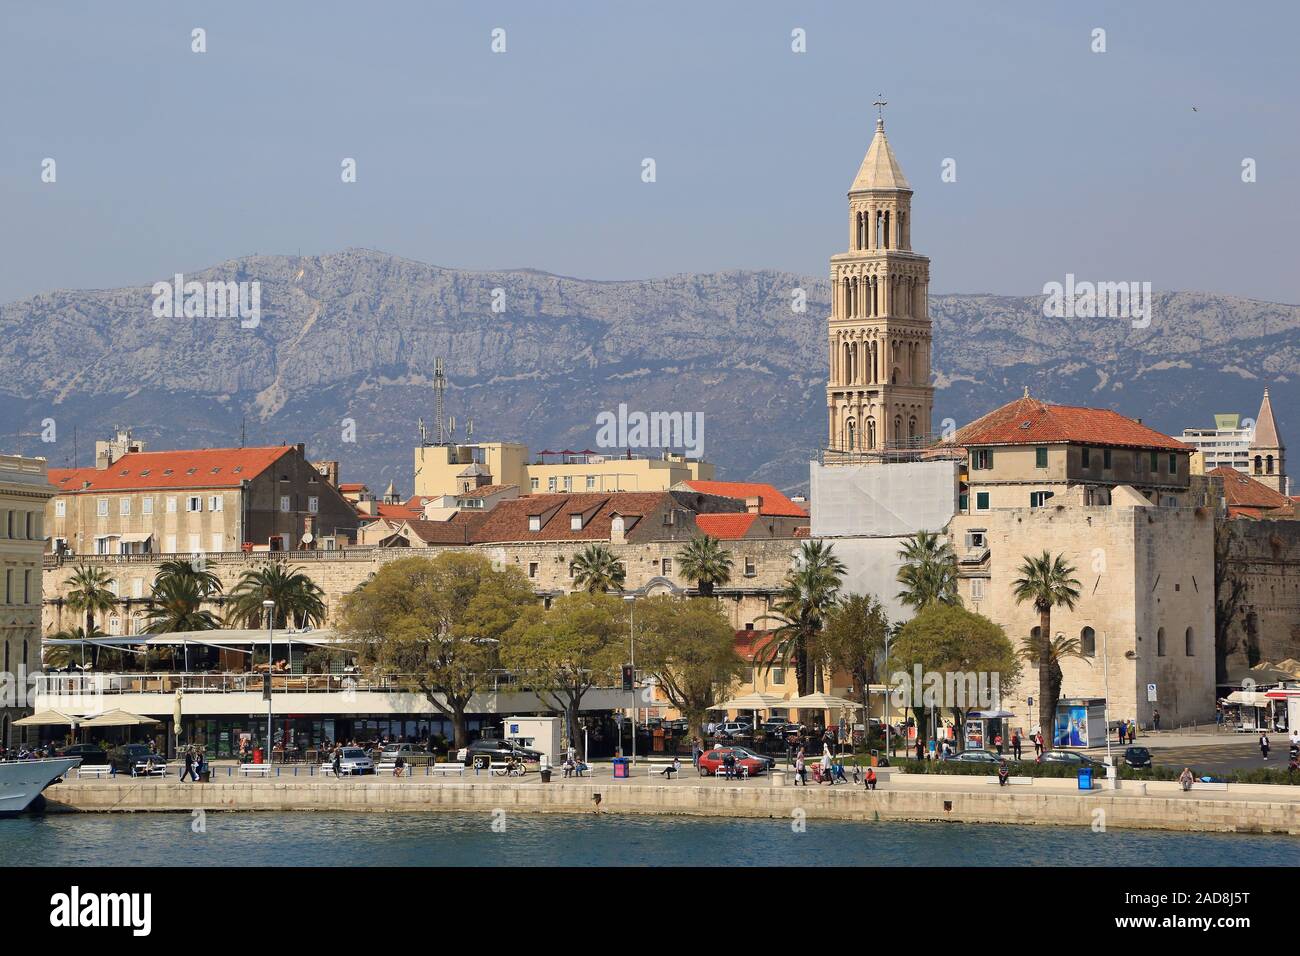 City view at the Waterfront of Split, Croatia Stock Photo